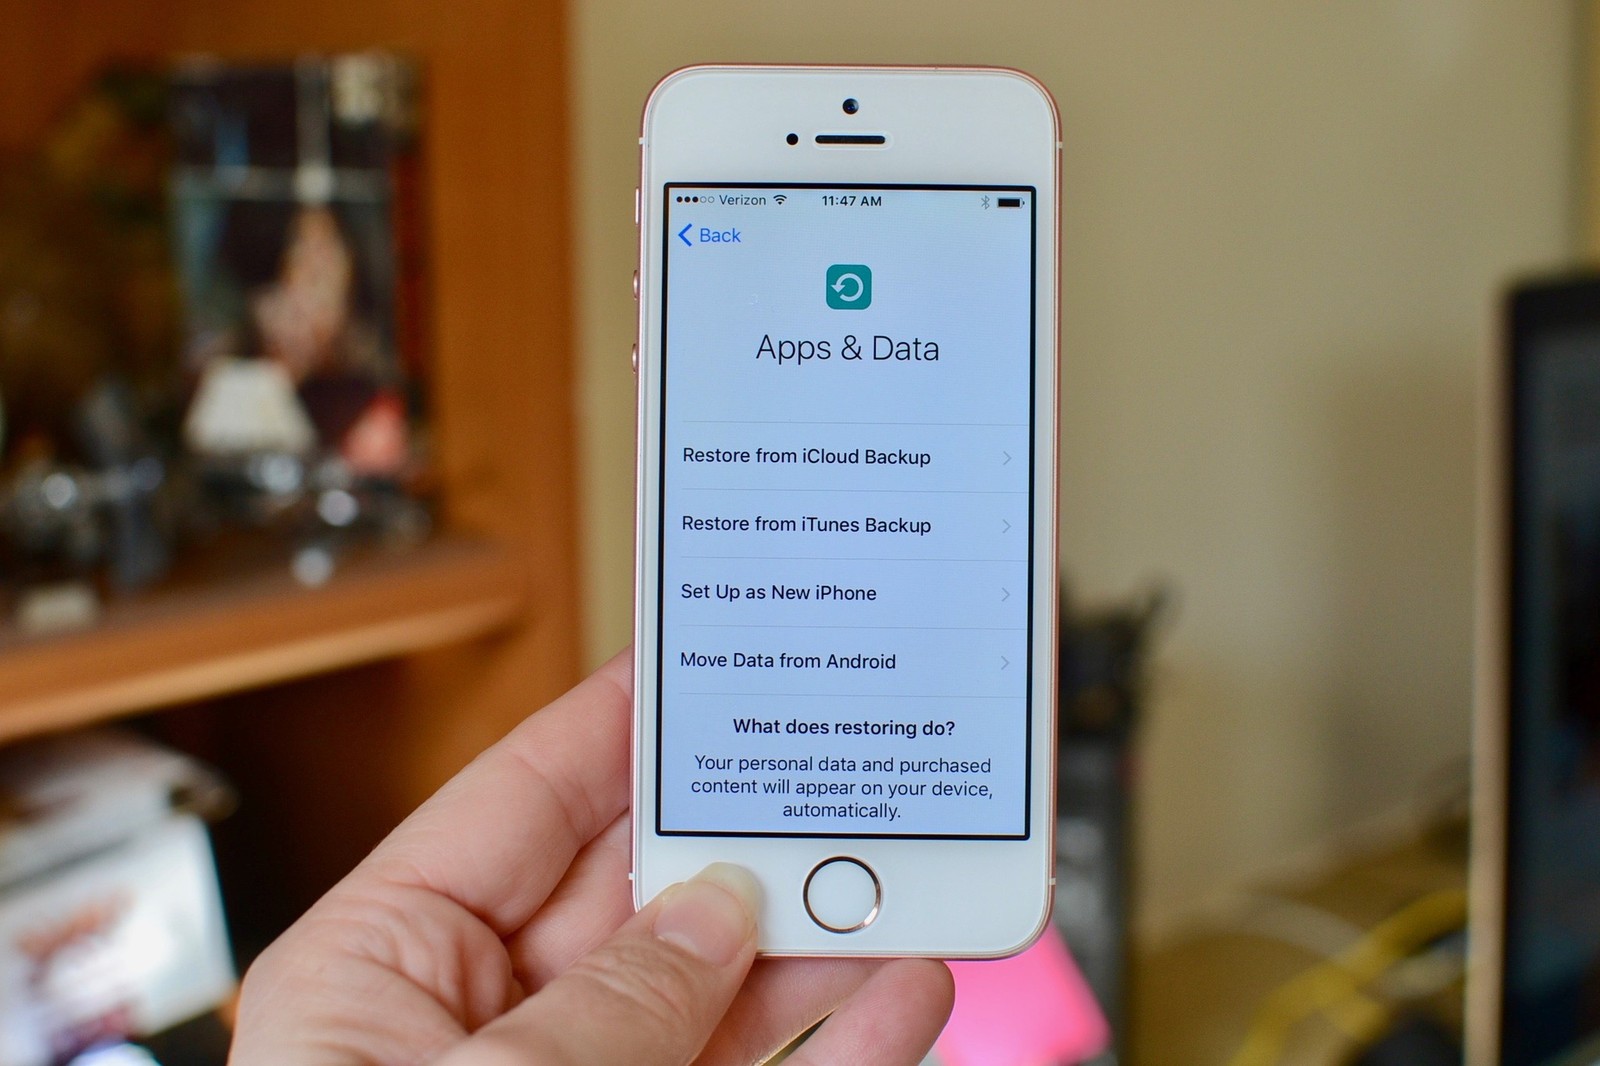 how to back up data on iPhone